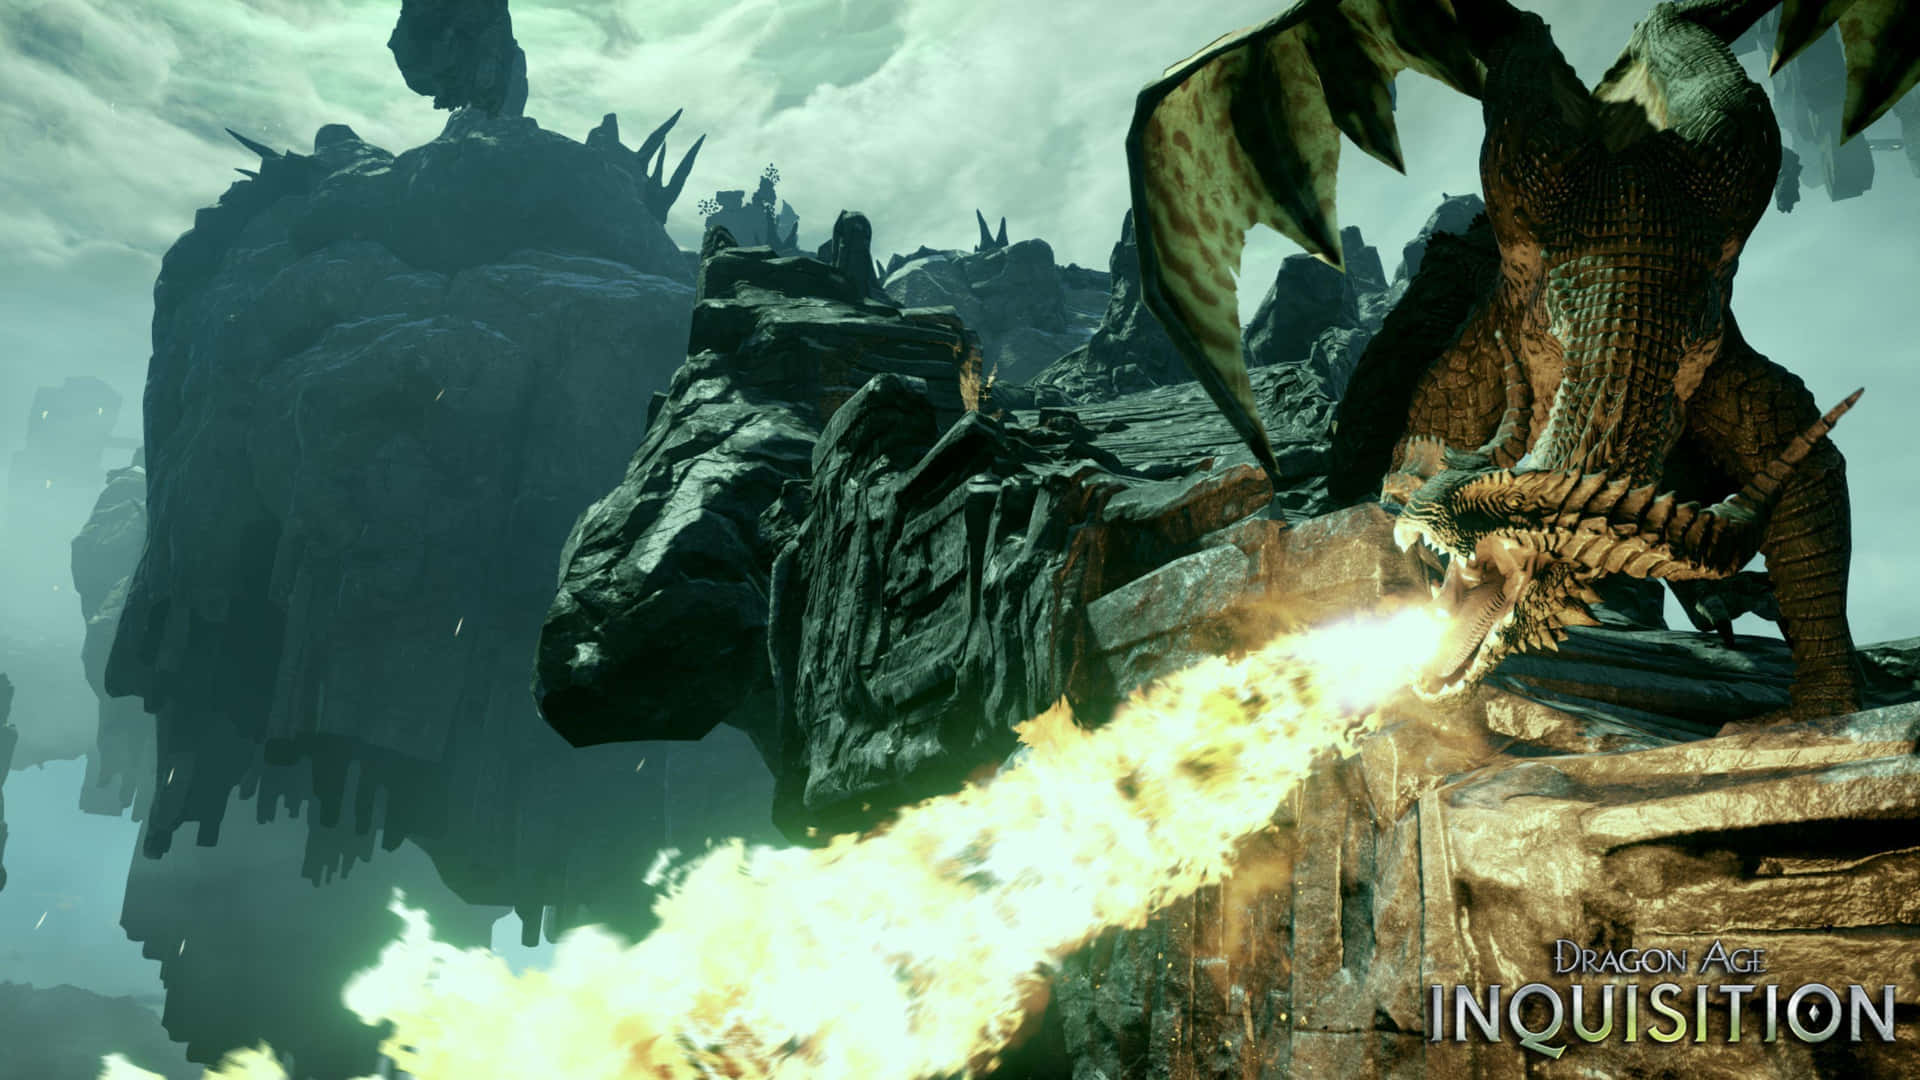 Explore the World of Thedas with Dragon Age: Inquisition